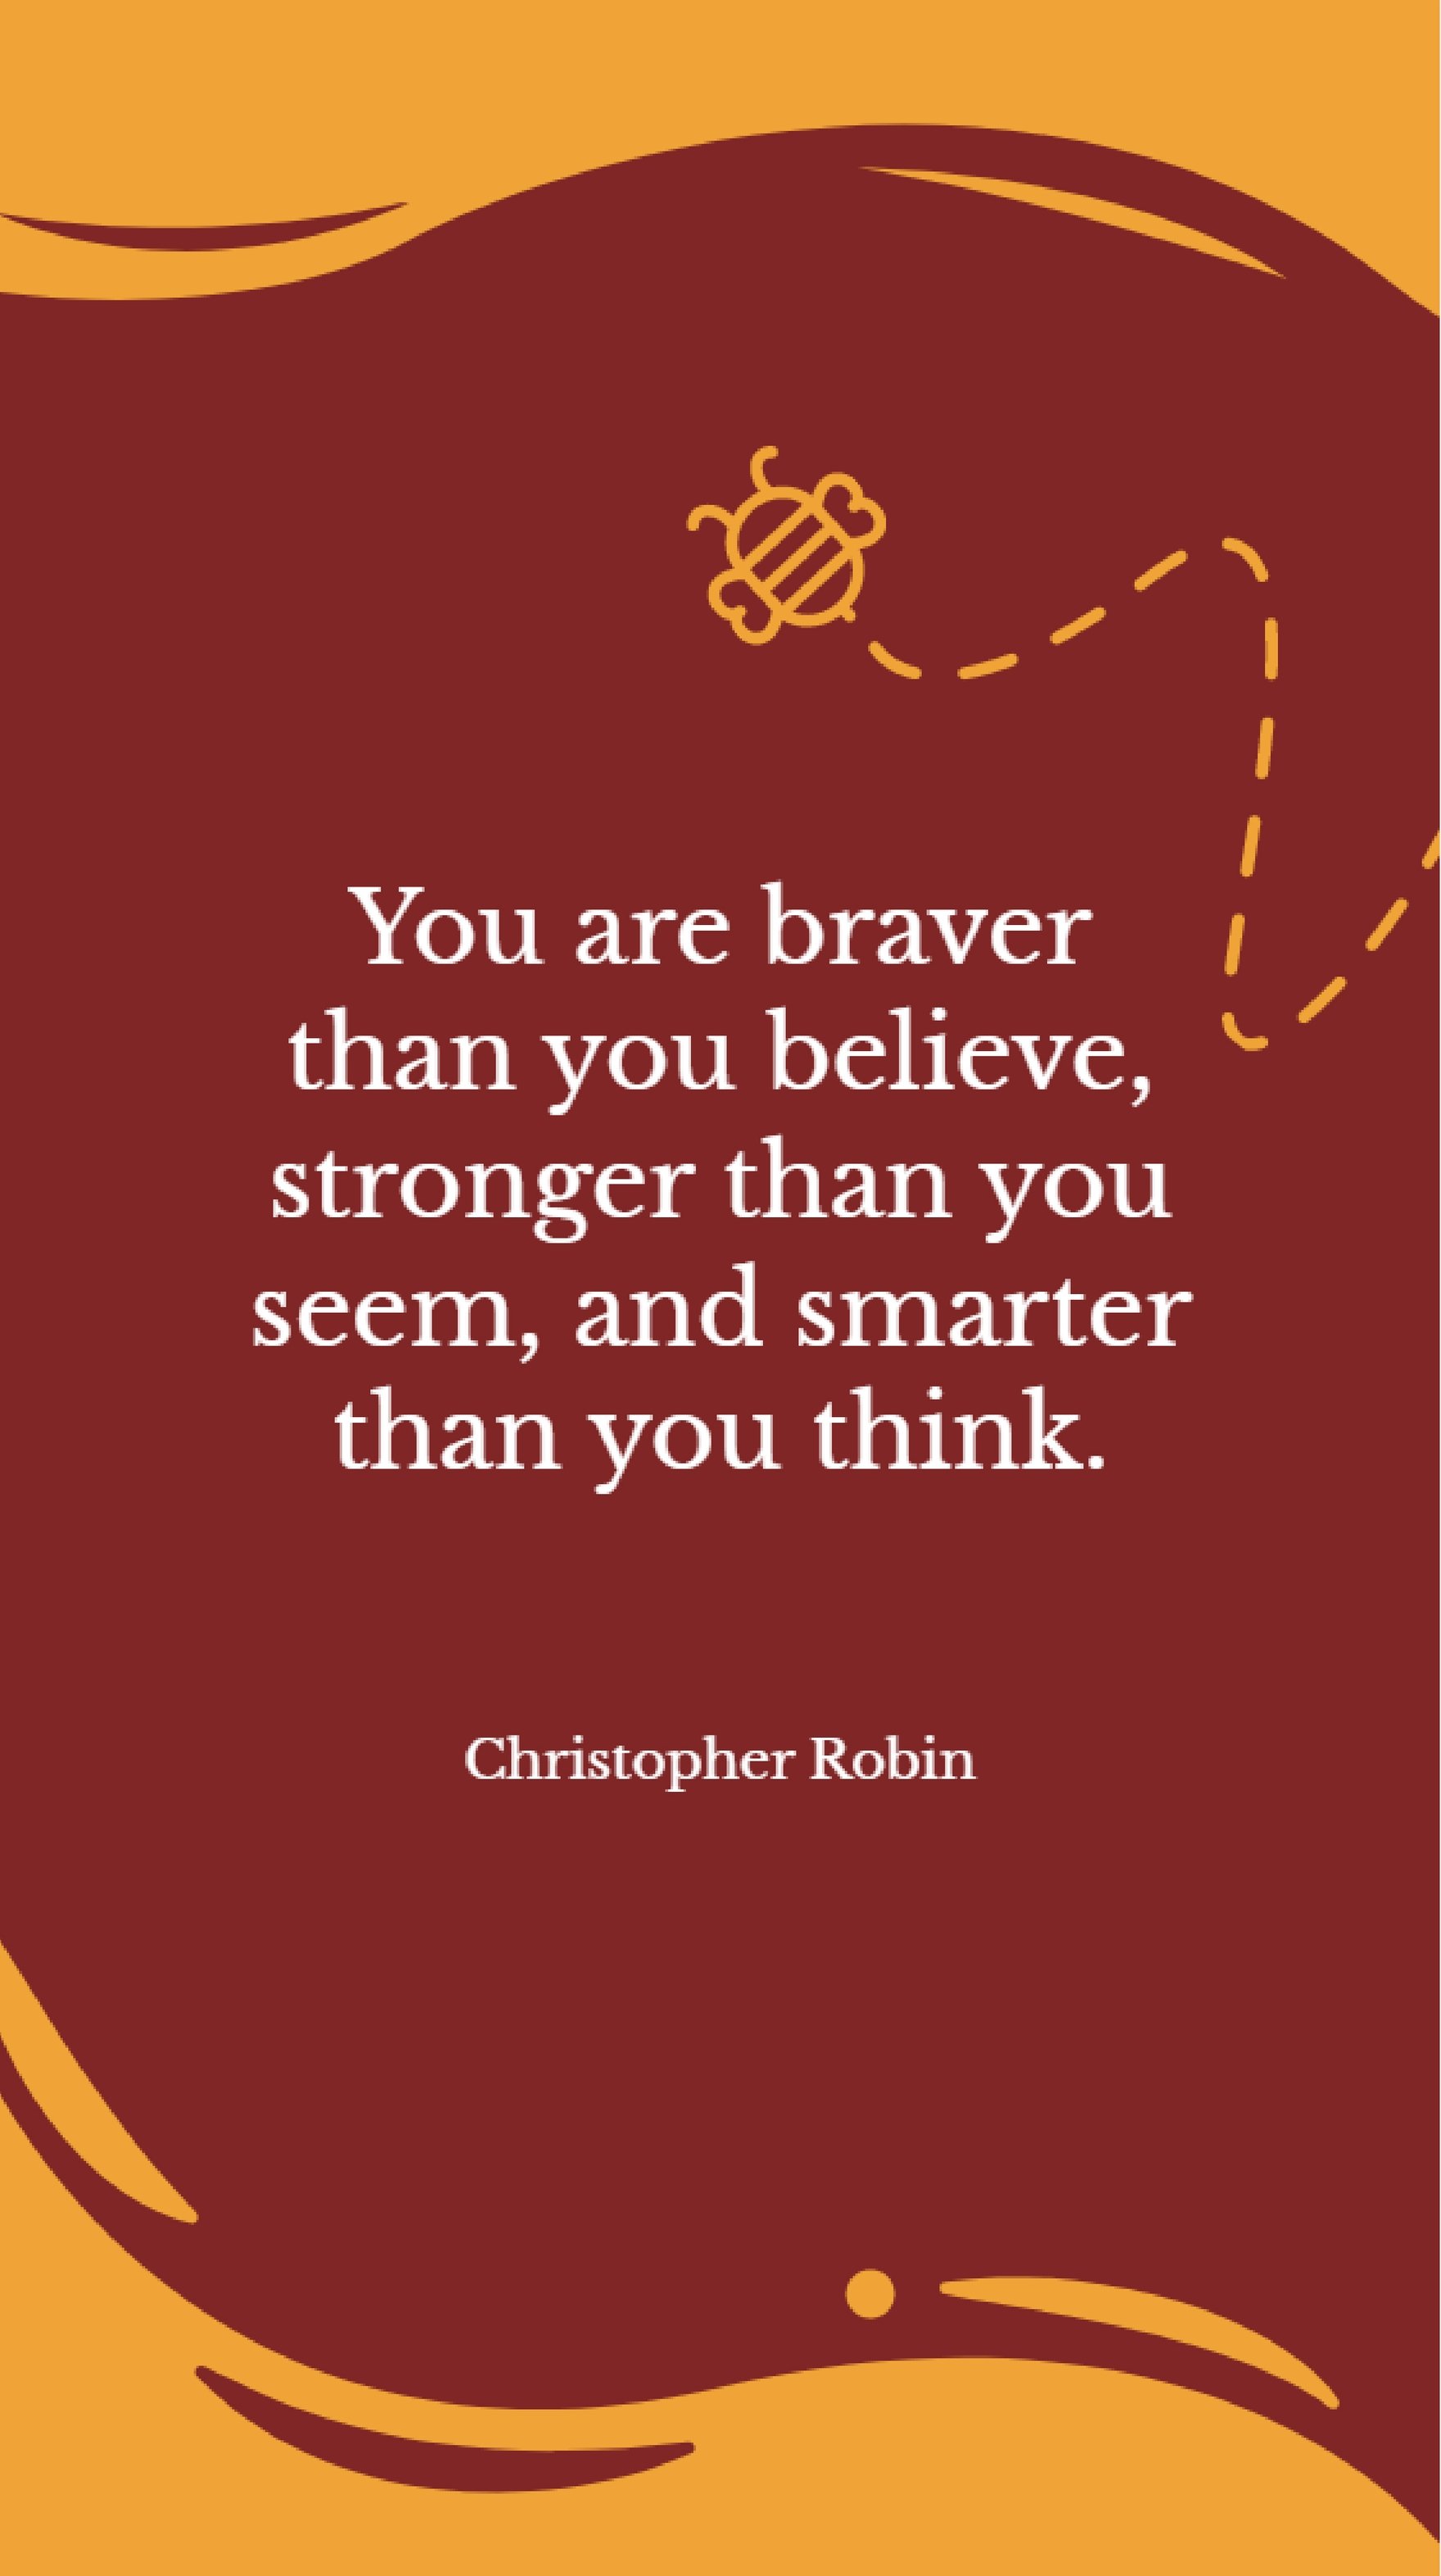 Christopher Robin - “You are braver than you believe, stronger than you seem, and smarter than you think.”